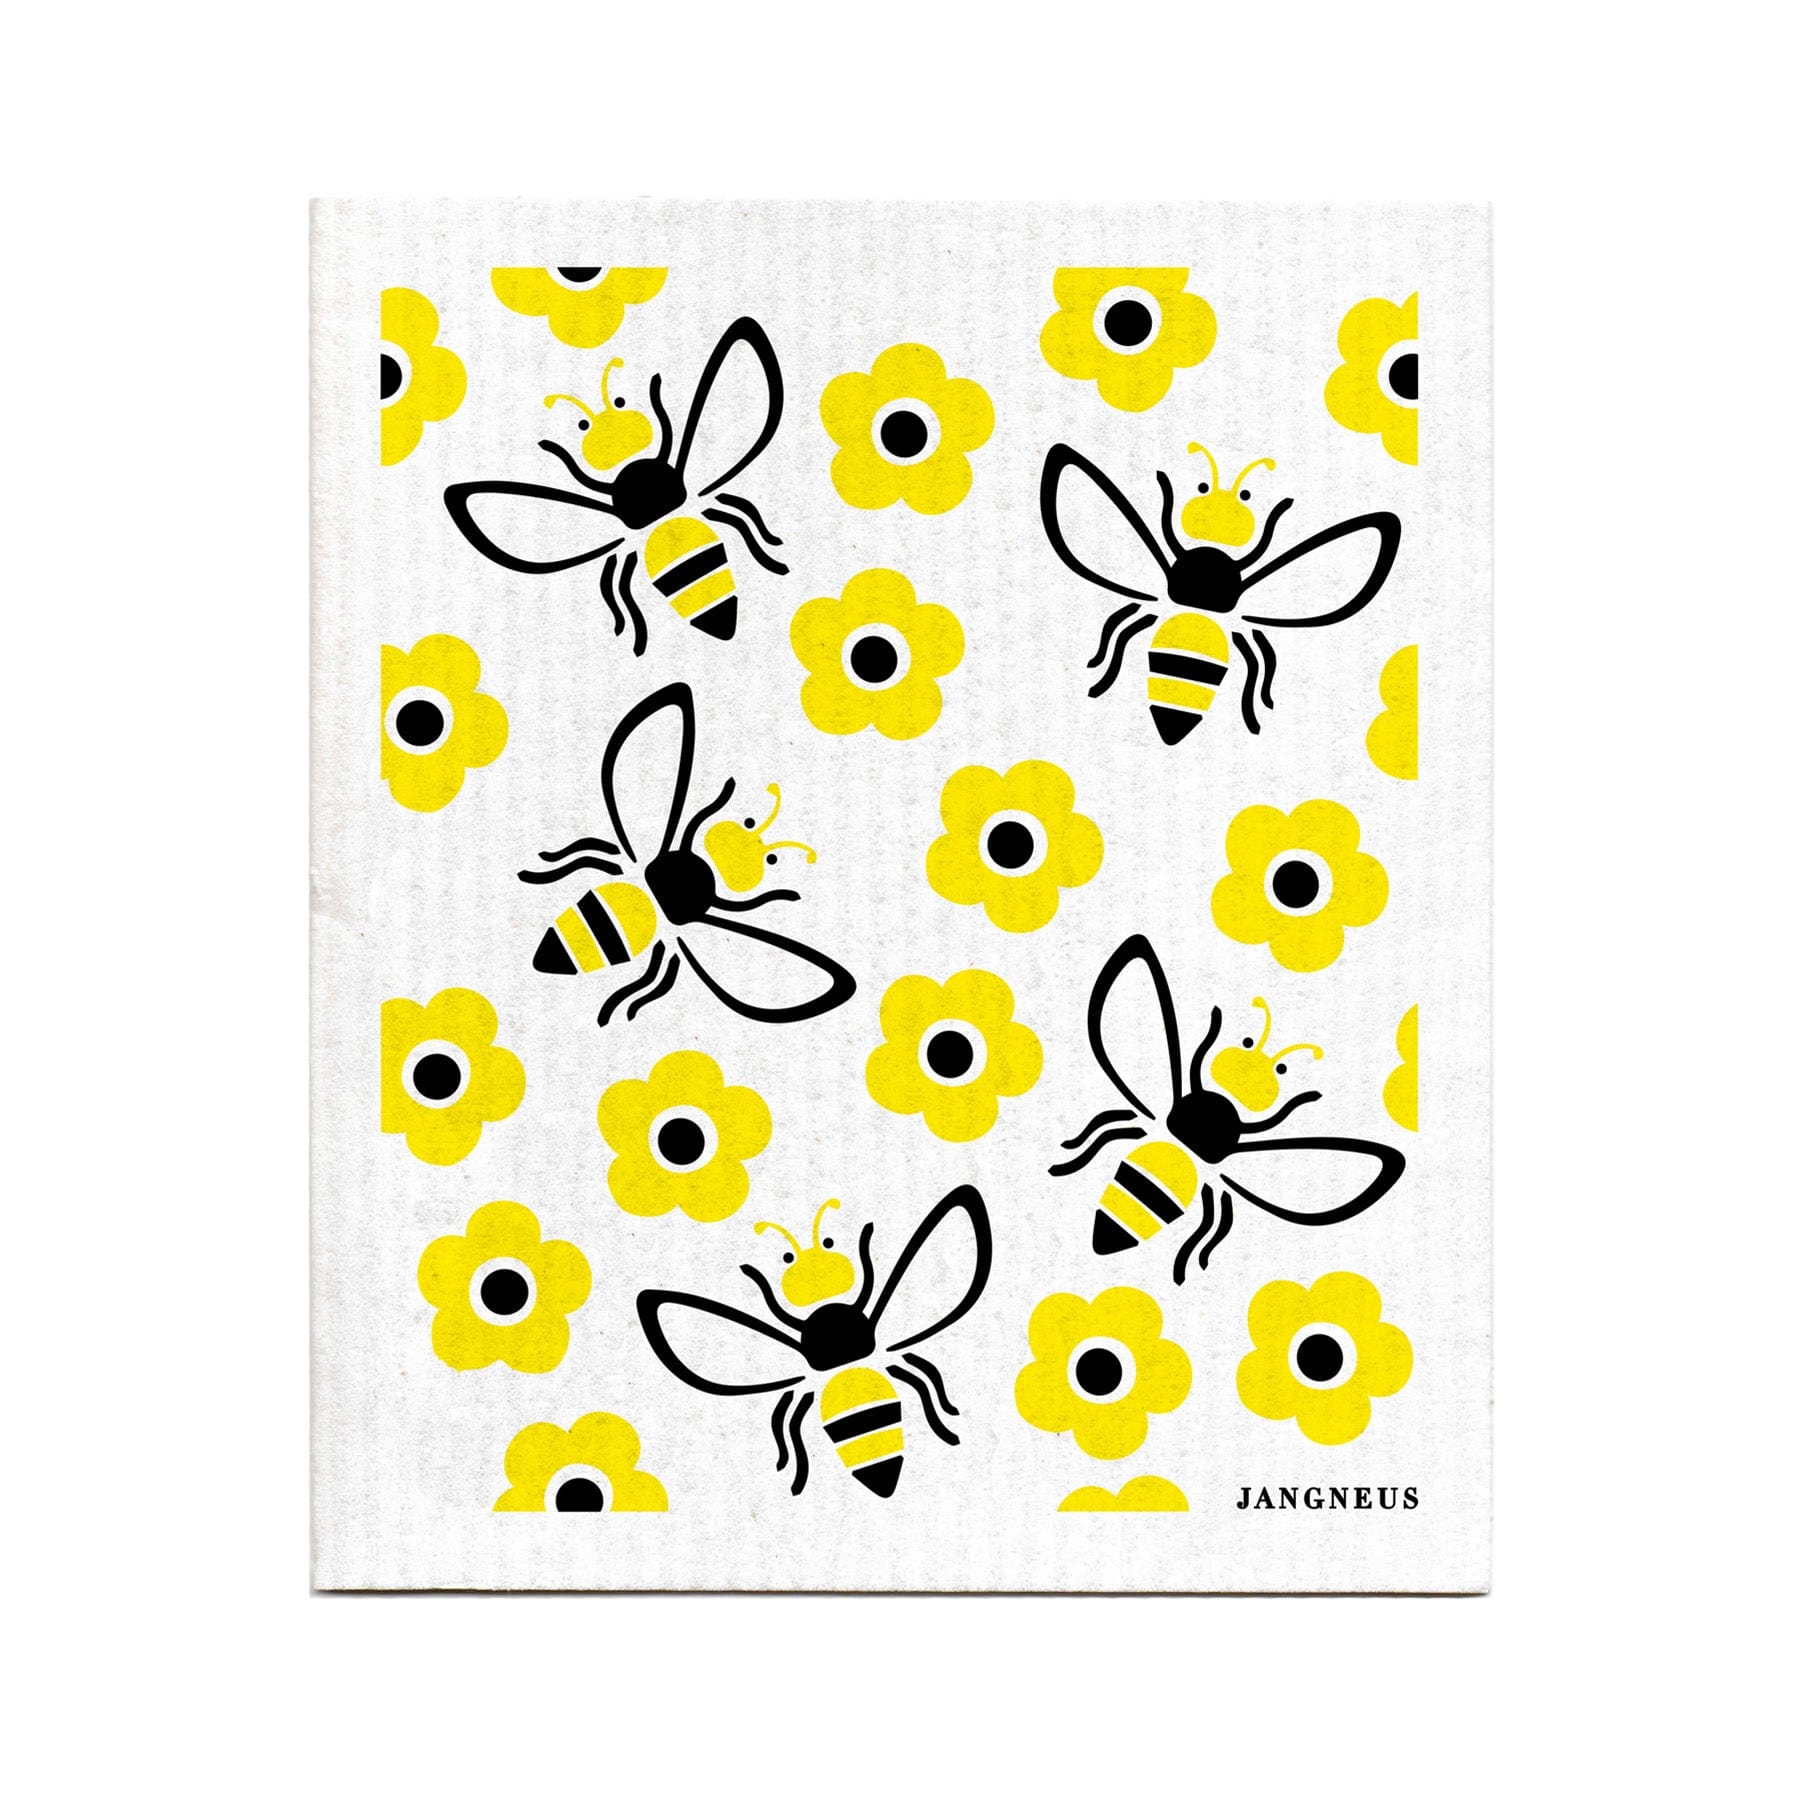 Bee and flower pattern on fabric, black and yellow bees with wings on white background, yellow flowers with black centers, Scandinavian design, textile print design, Jangneus brand label.